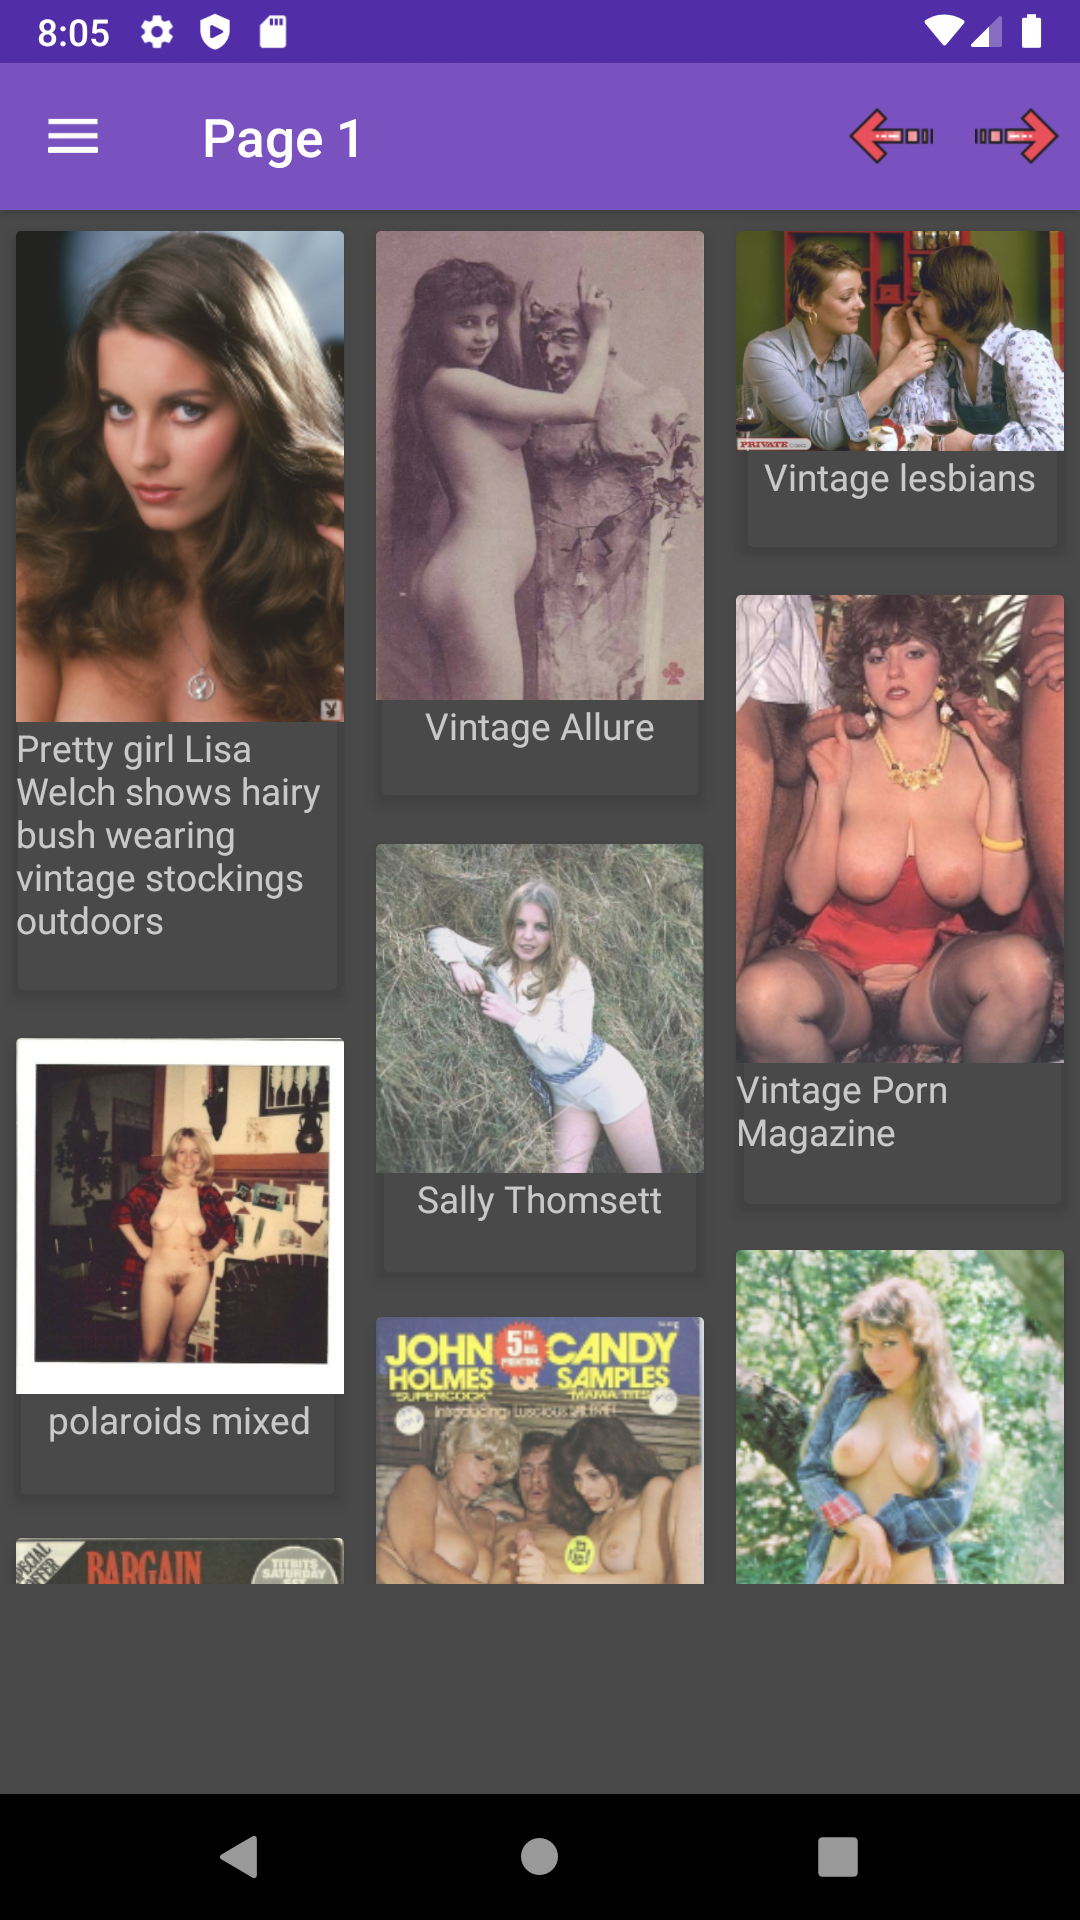 Vintage Porn cuckhold,pic,sexy,download,galleries,photo,android,phone,pictures,maker,pornstars,hot,hentai,app,pics,apps,search,picture,manga,apk,porn,hentei